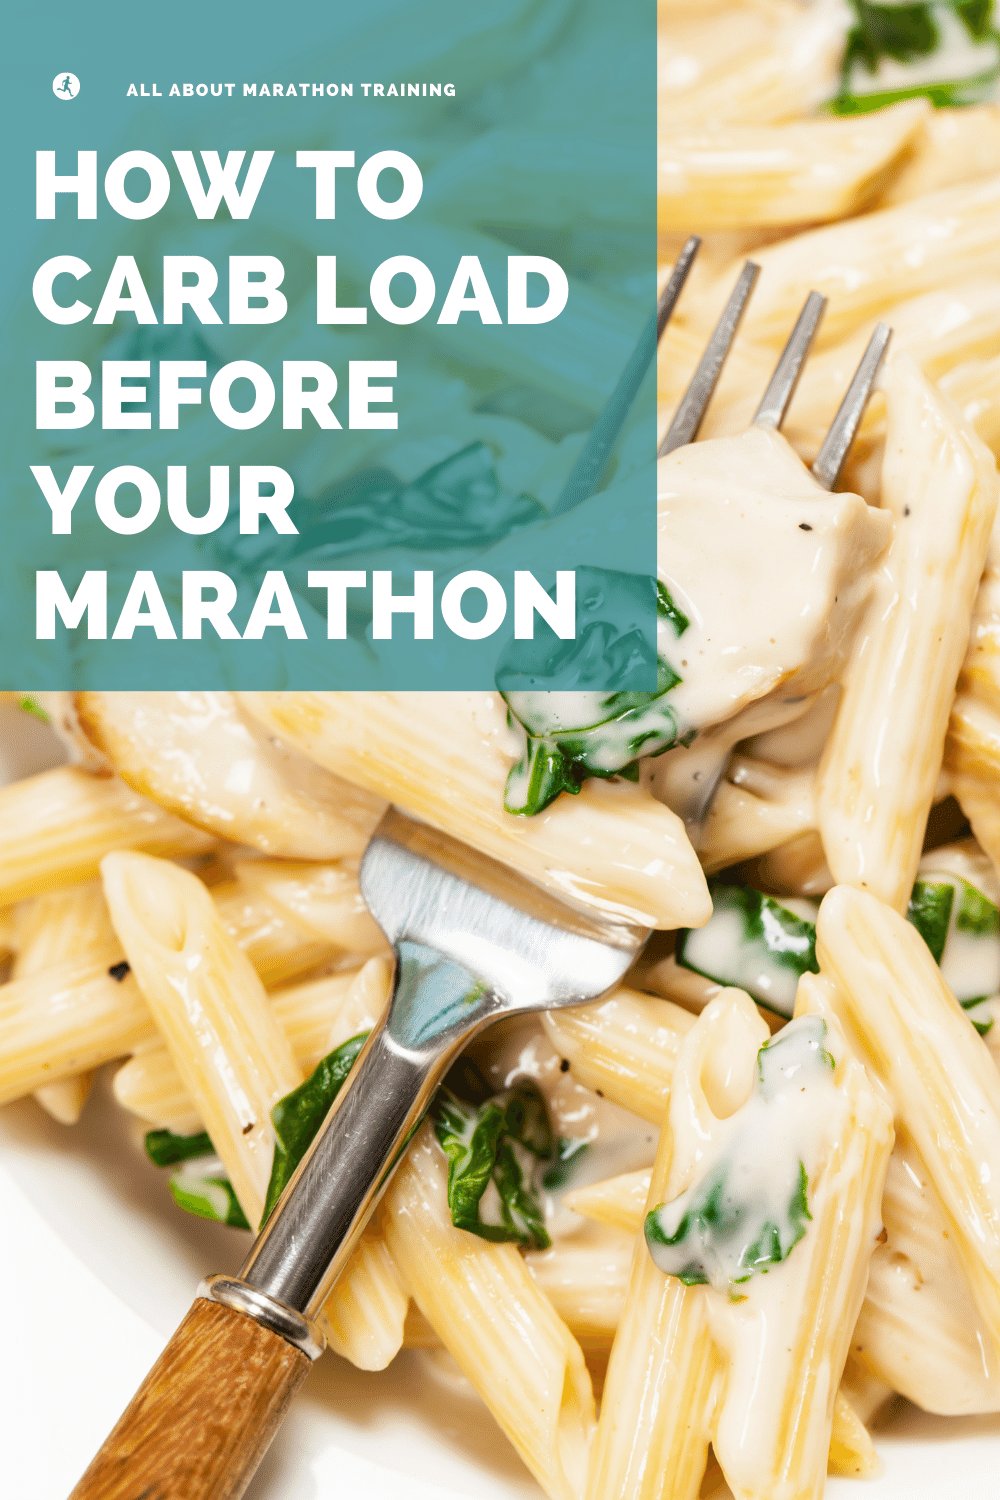 How to carbo load